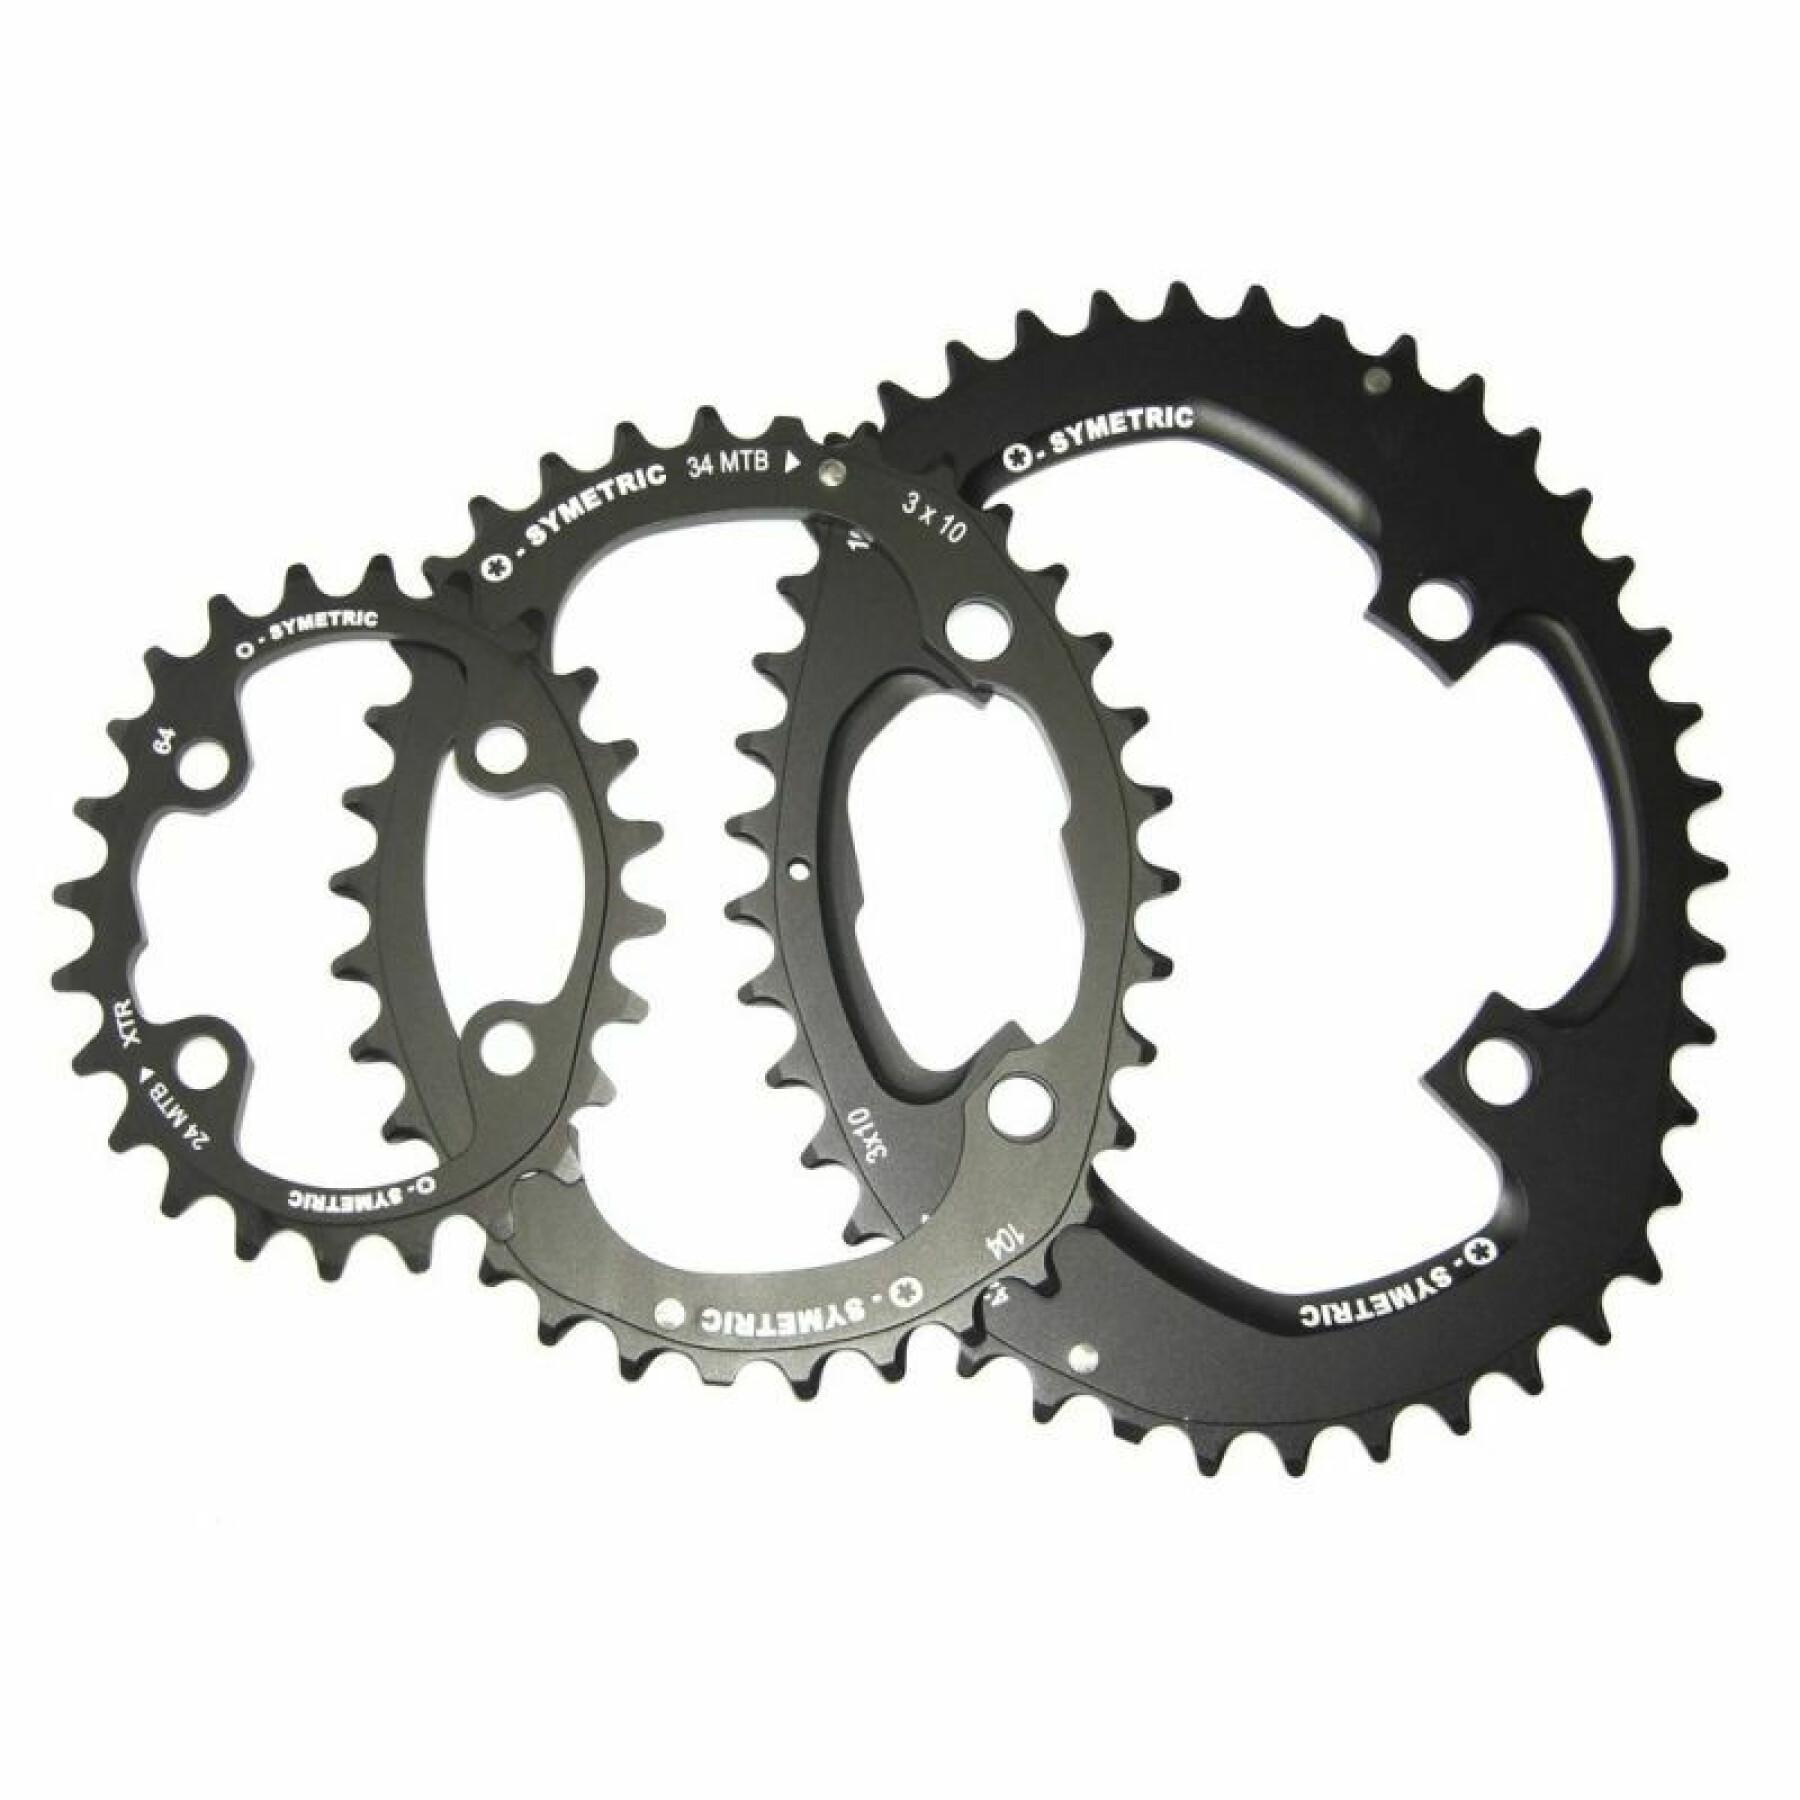 Plateaux osymetric Stronglight 104/64 BCD 24-34-42T